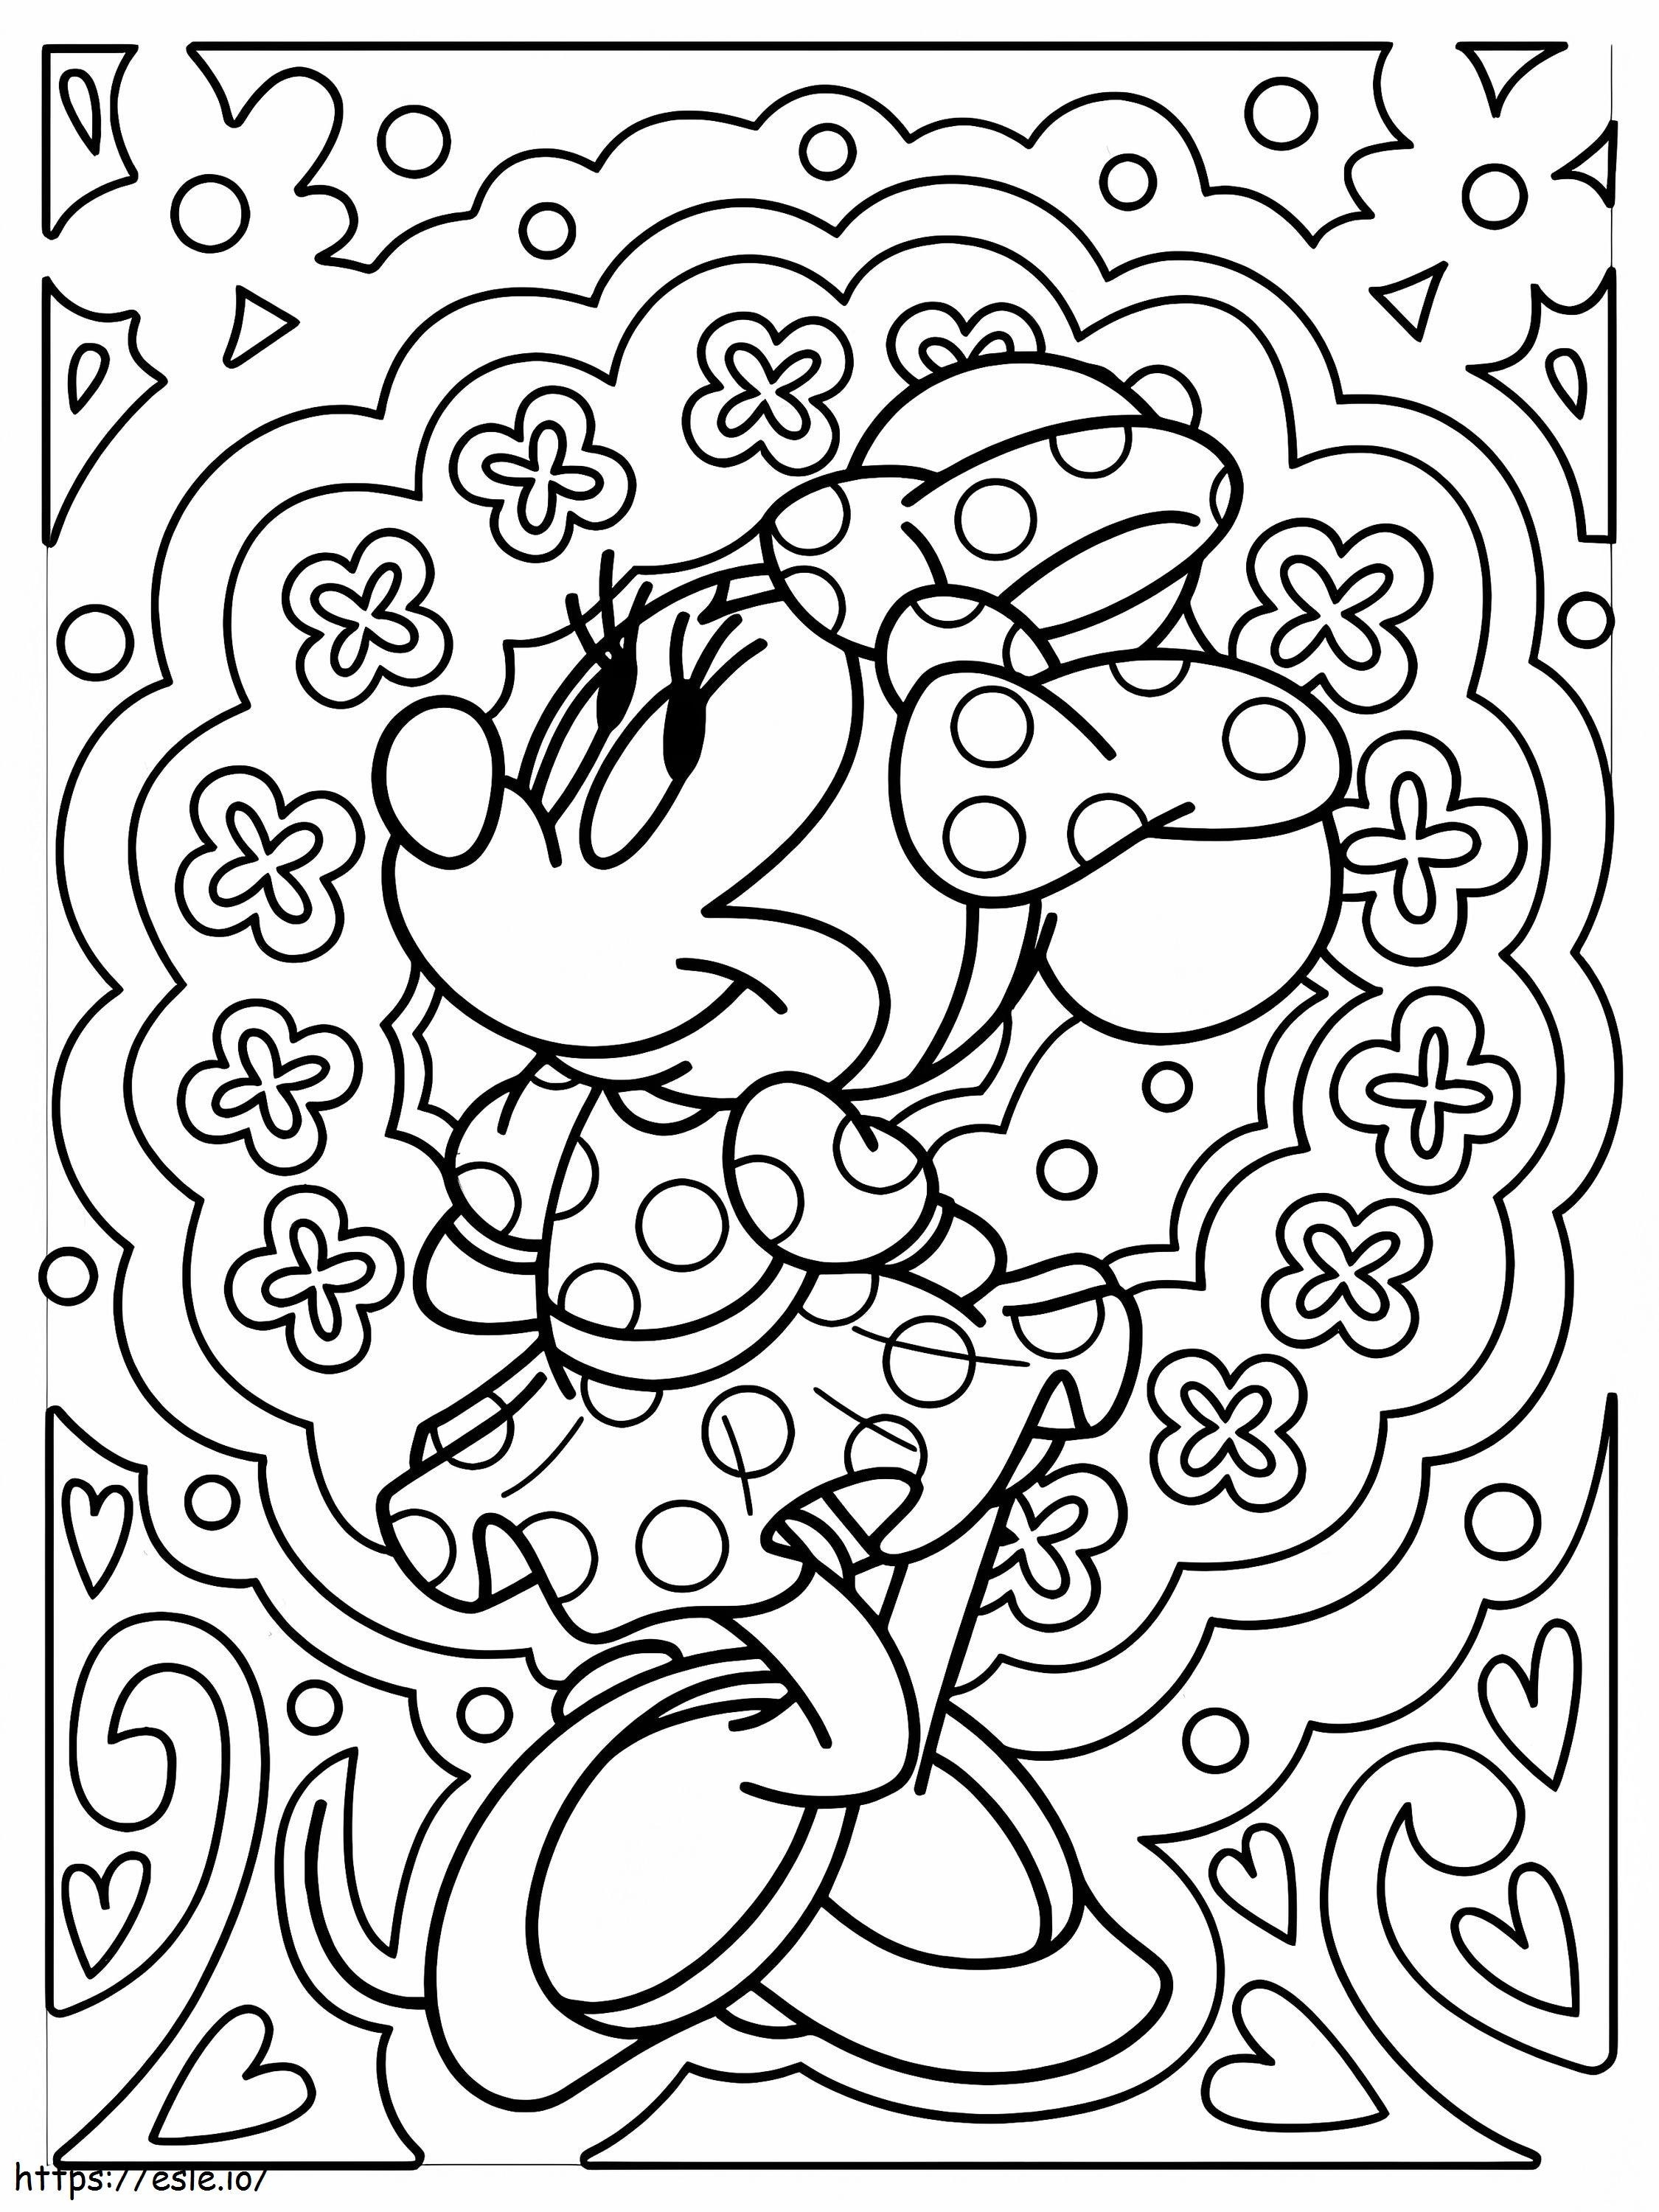 Minnie Mouse Is For Adults coloring page